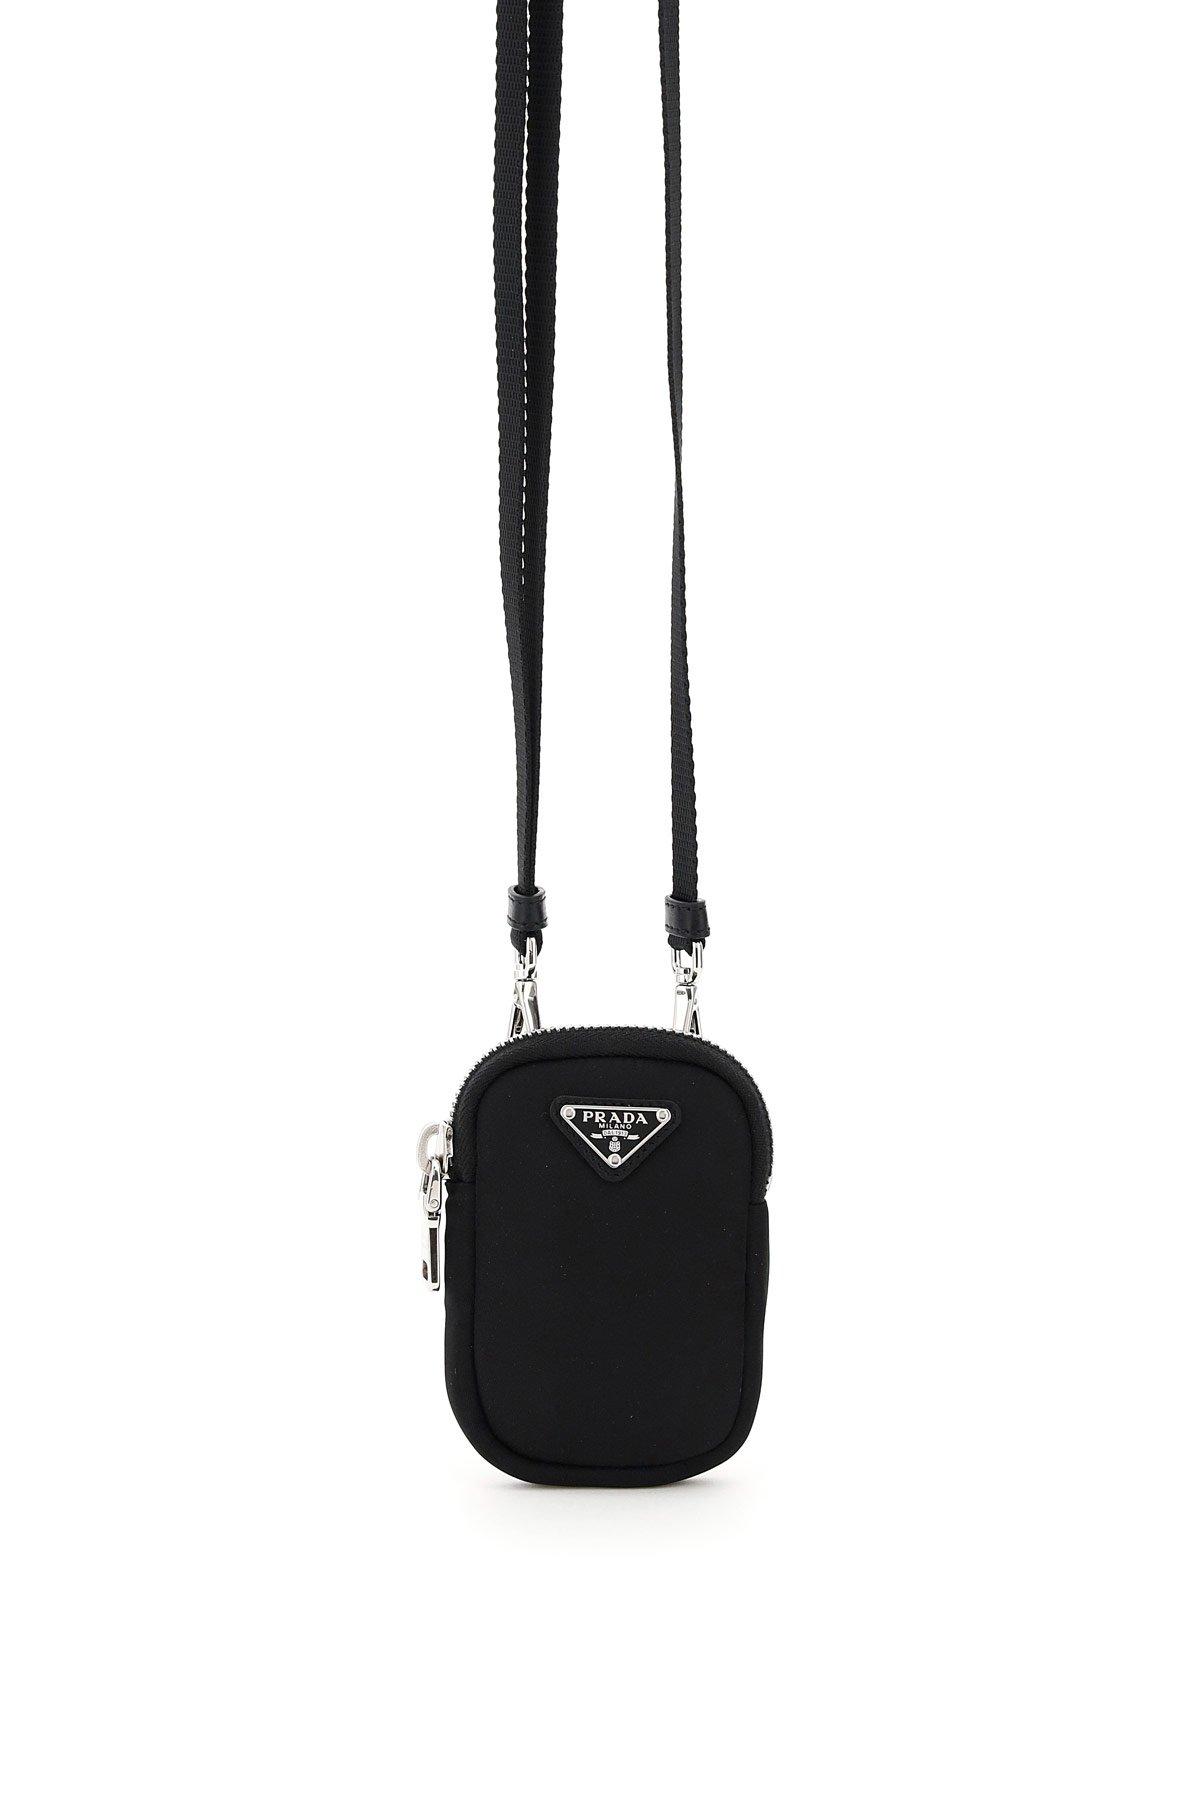 Prada Synthetic Mini Pouch With Shoulder Strap in Nero (Black) | Lyst